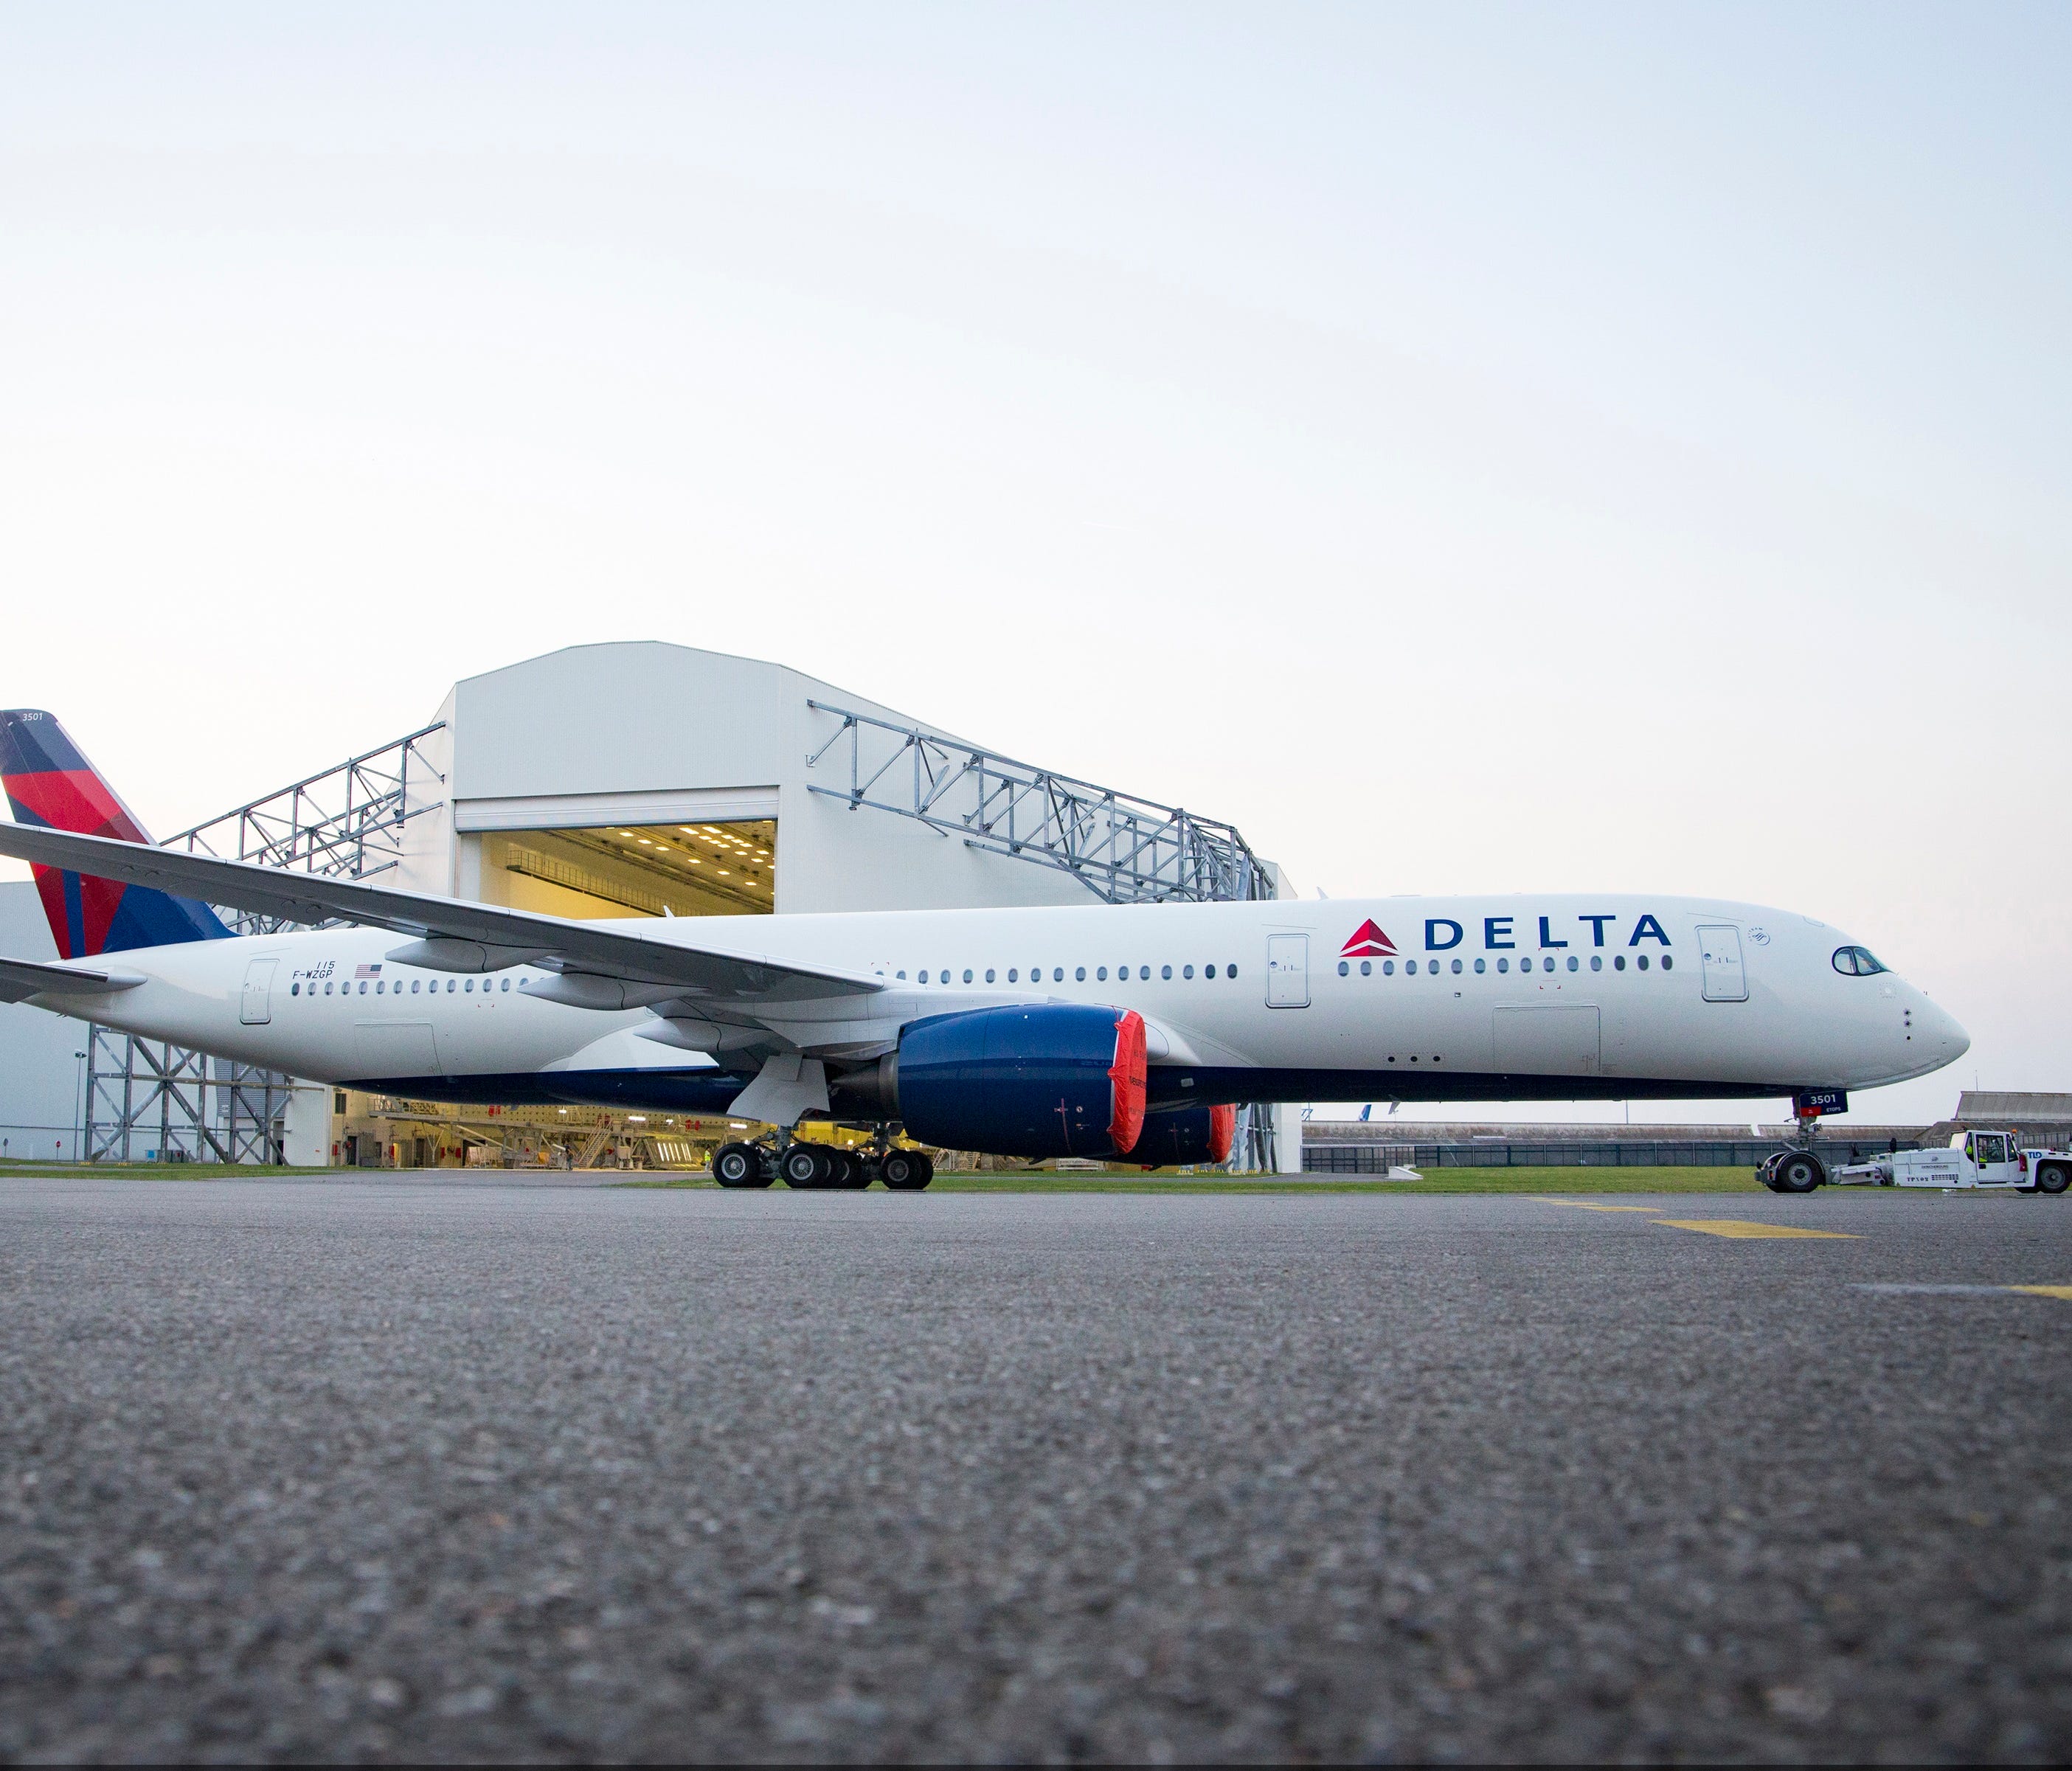 Delta Air Lines provided this image of its first Airbus A350 widebody jet. It rolled out of the jetmaker's paint shop in France on June 13, 2017.